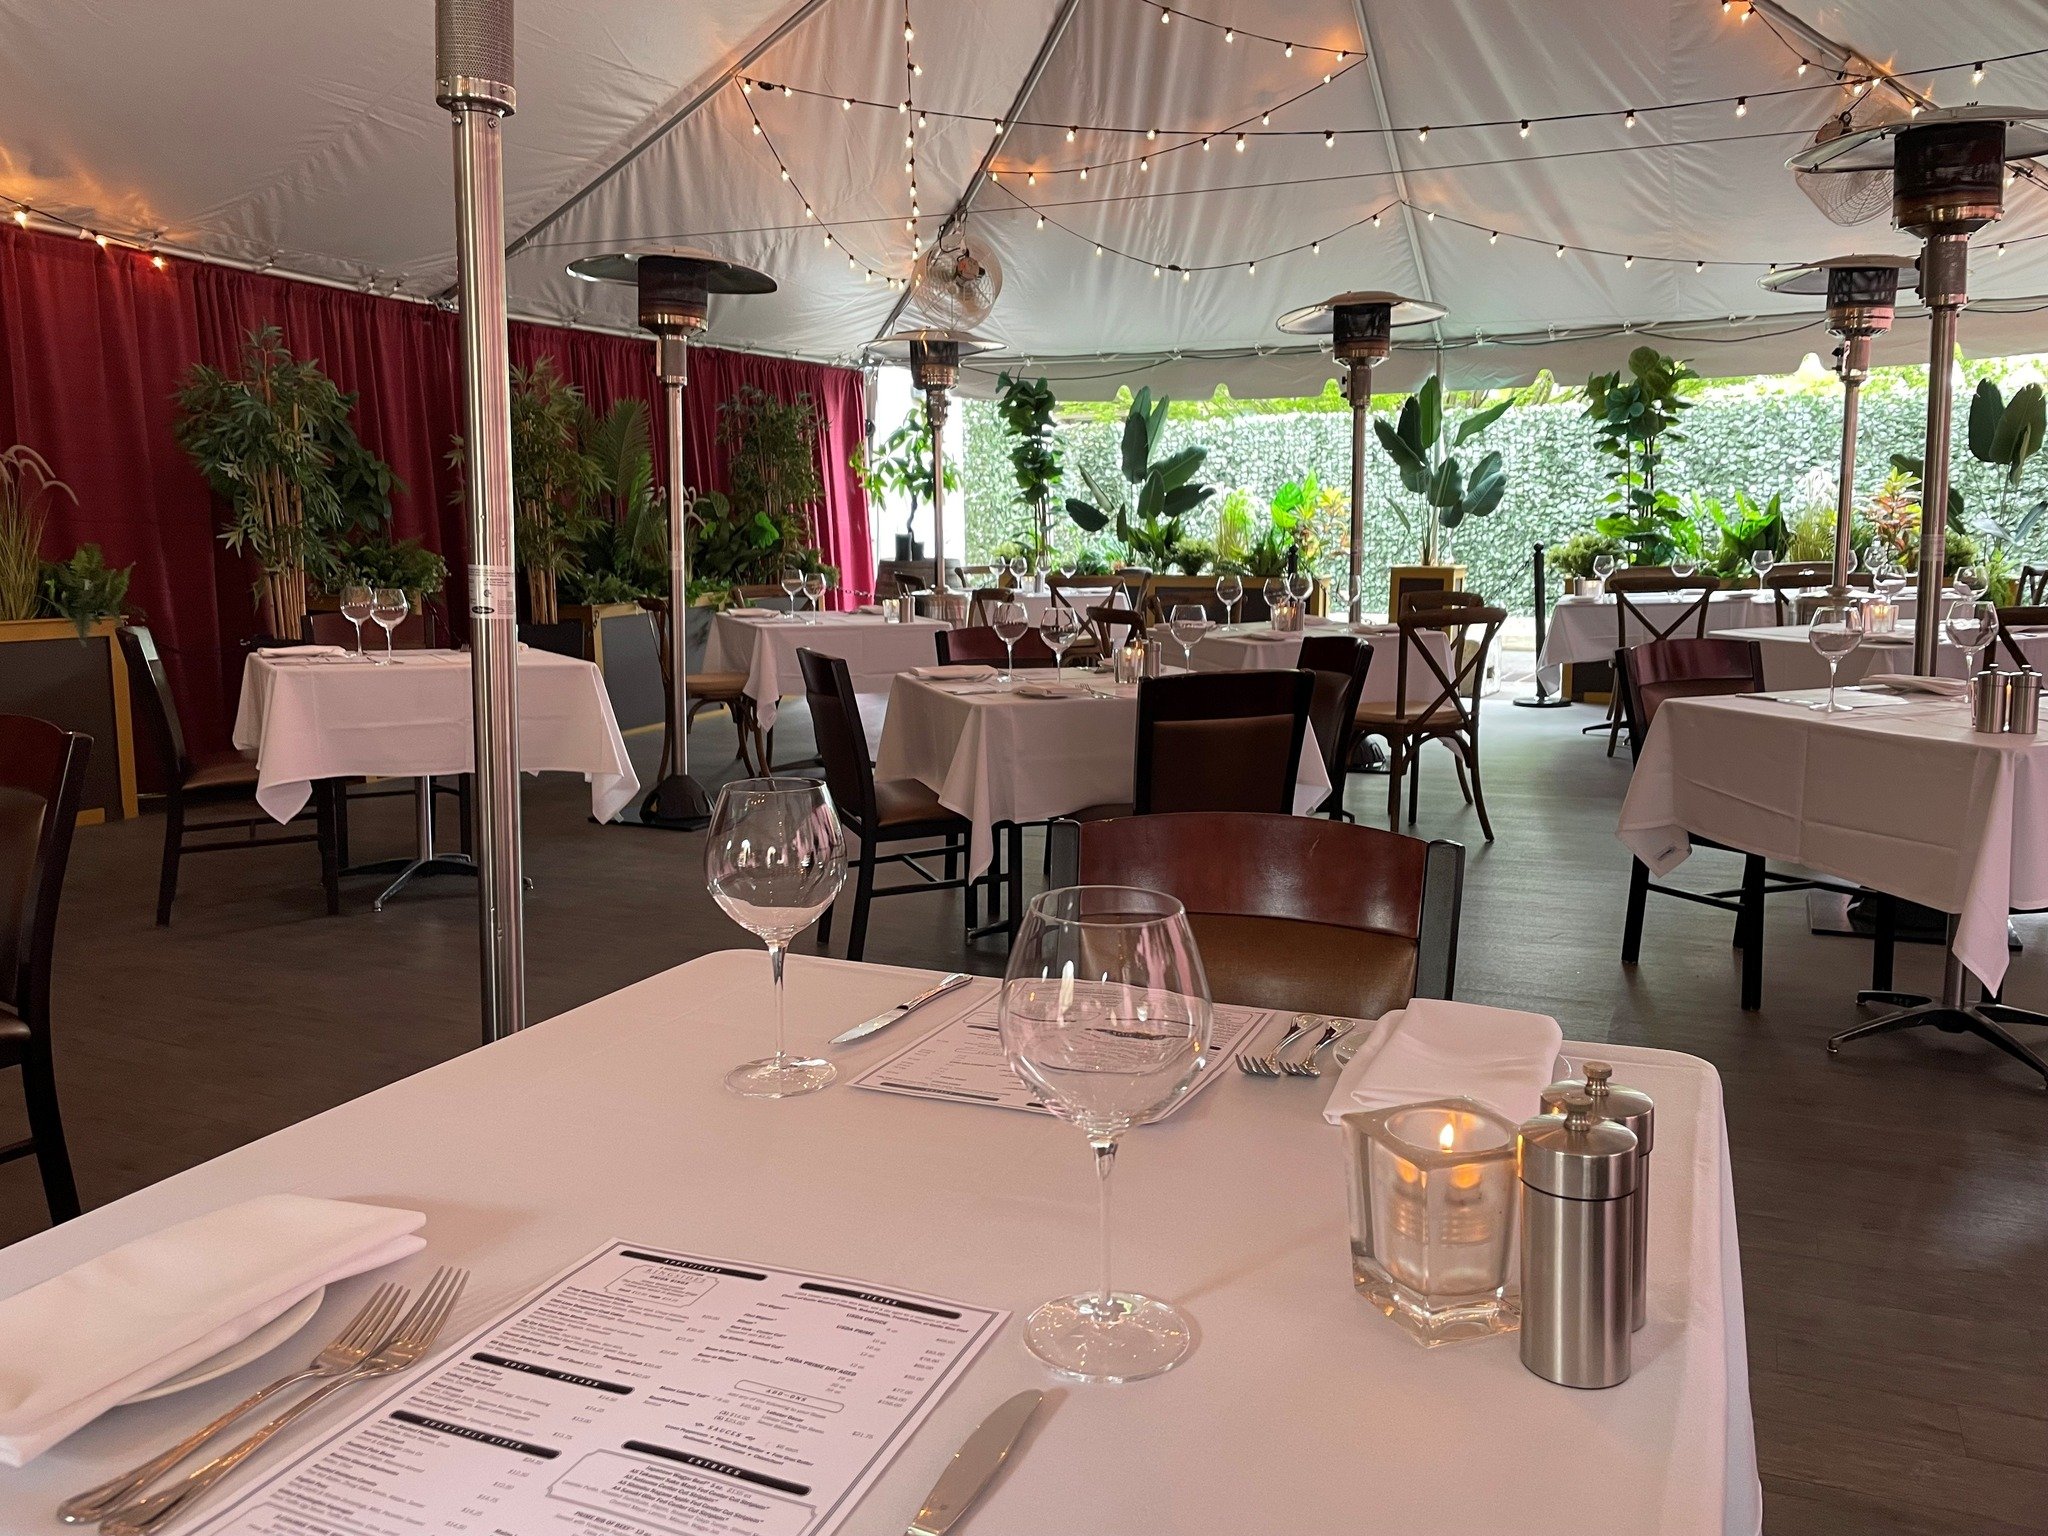 Just in time for warmer weather and sunny skies, outdoor dining returns to the RingSide!  We are once again accepting reservations in our main dining room, lounge and patio.  Visit our website today, we've even got a couple of outdoor reservations av